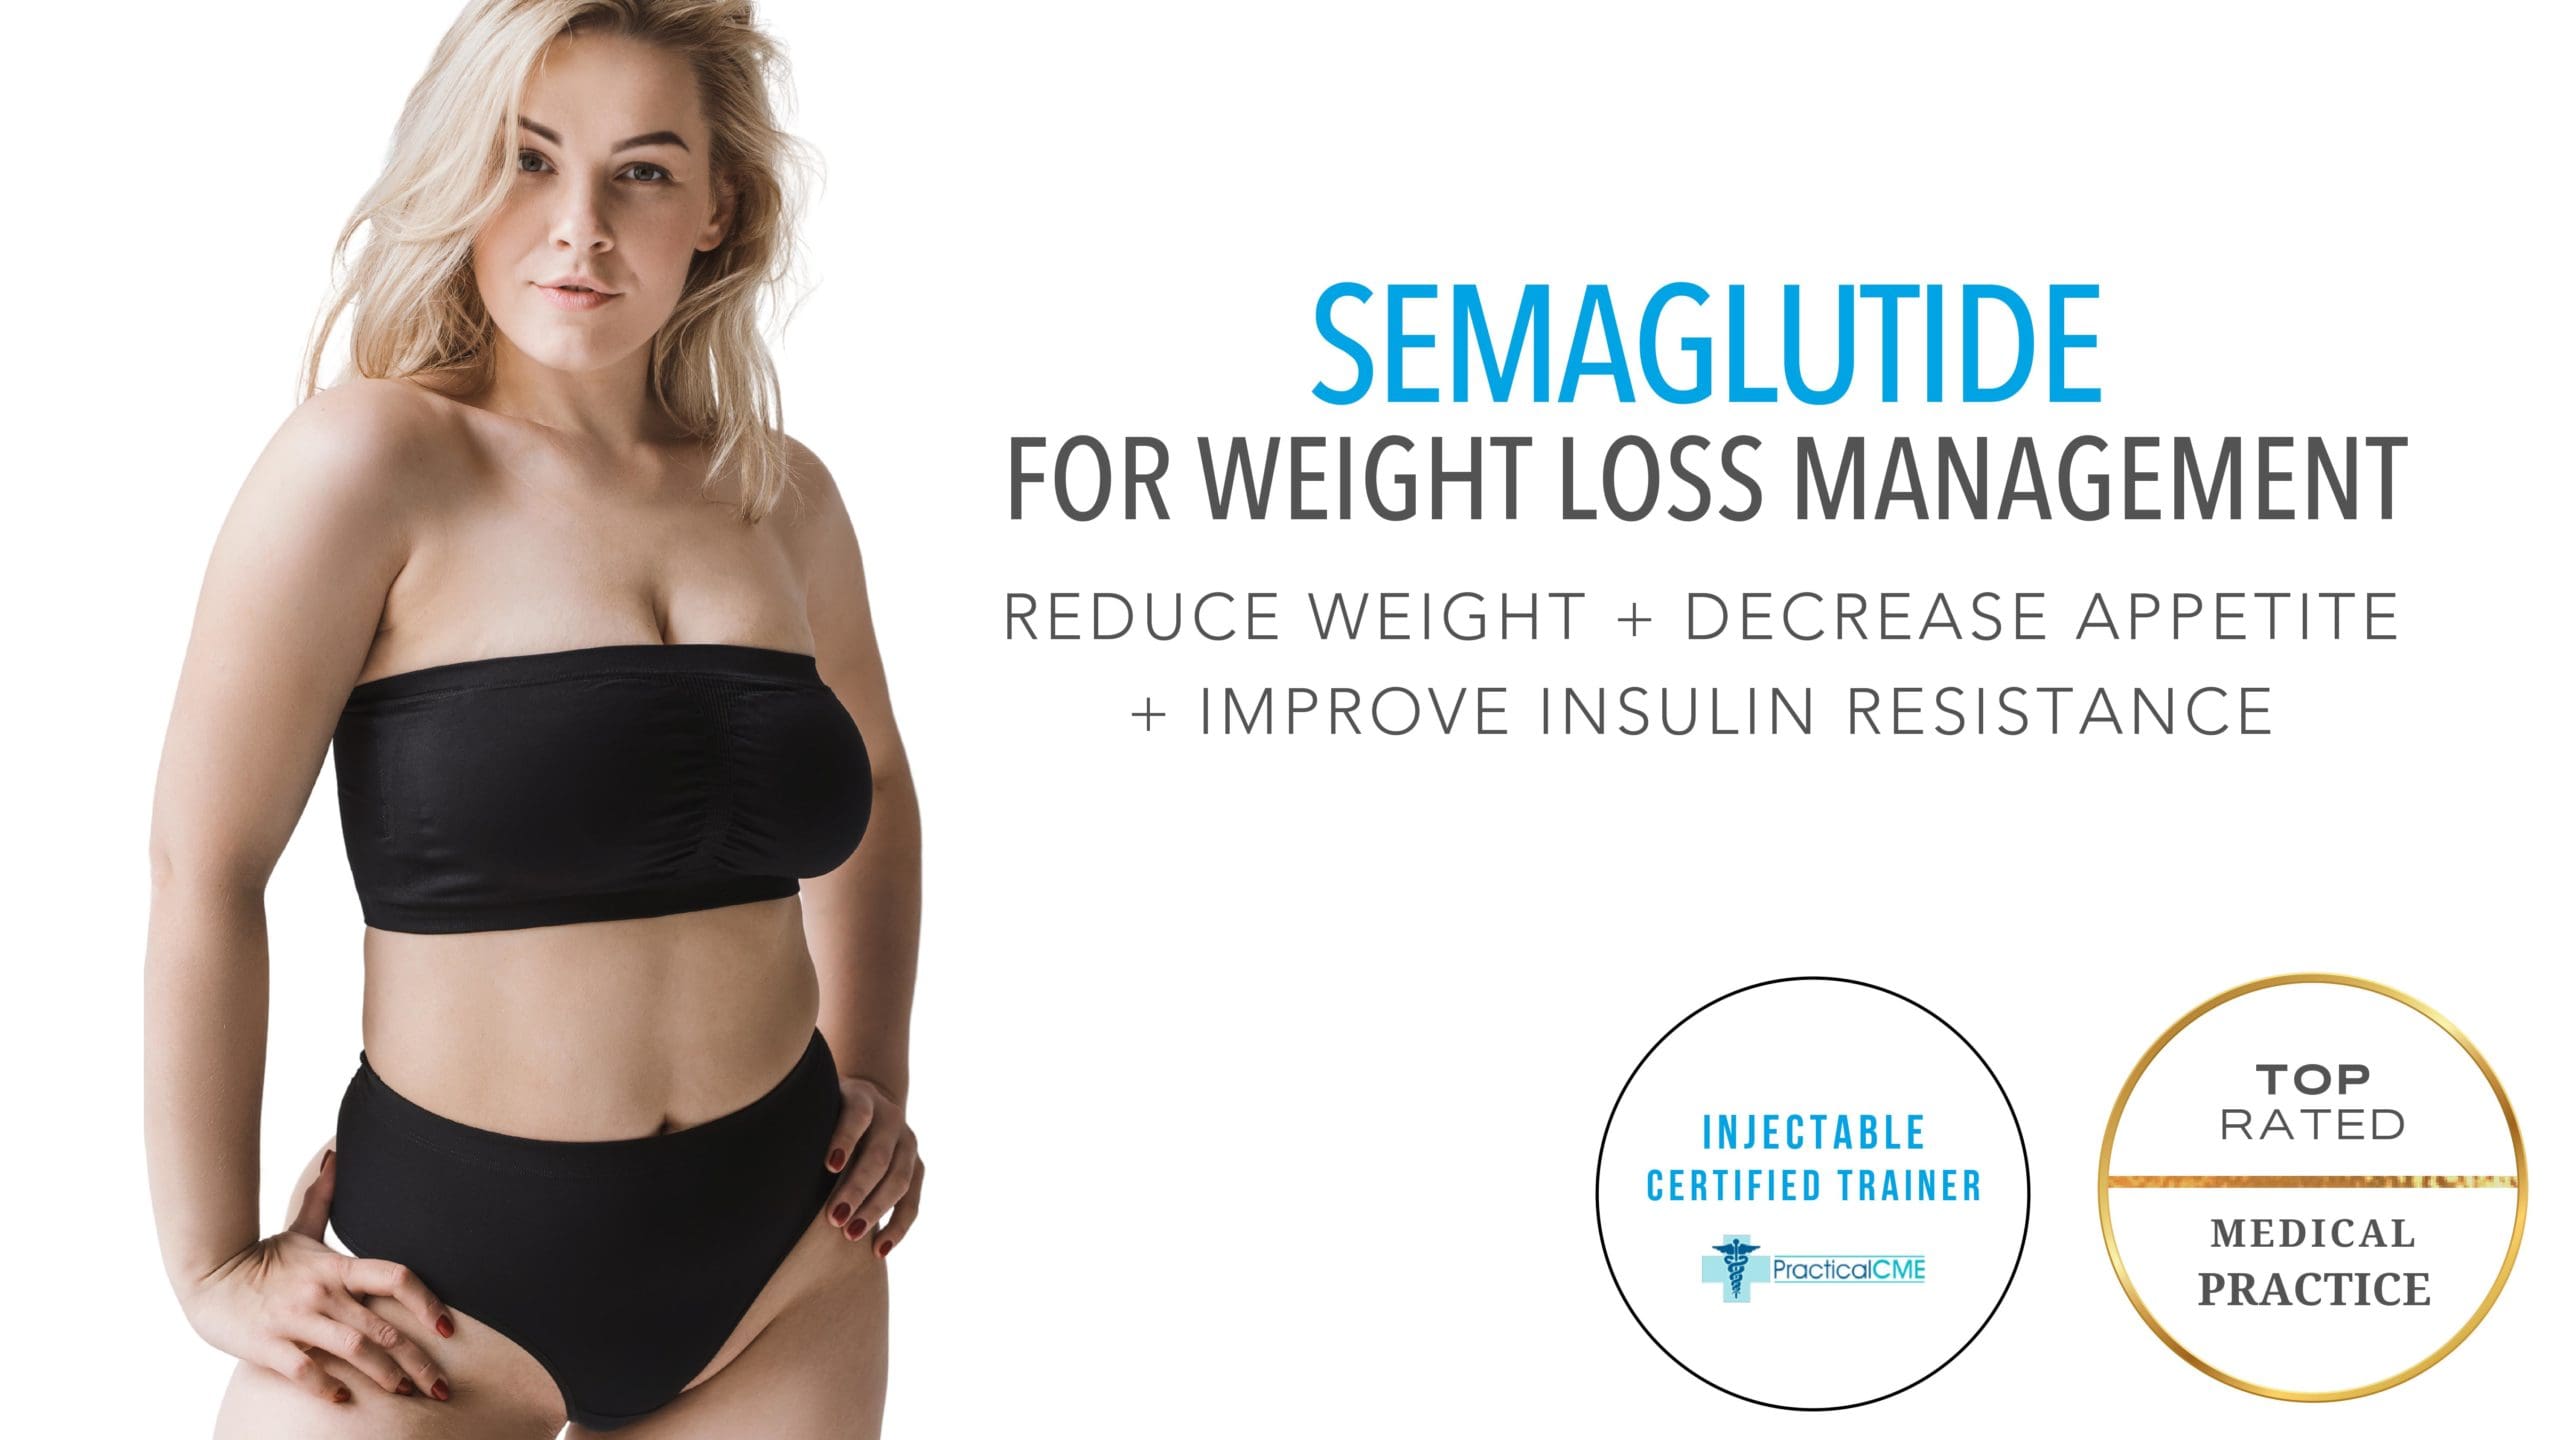 Woman looking healthy and happy as a result of semaglutide treatment for weight loss management.